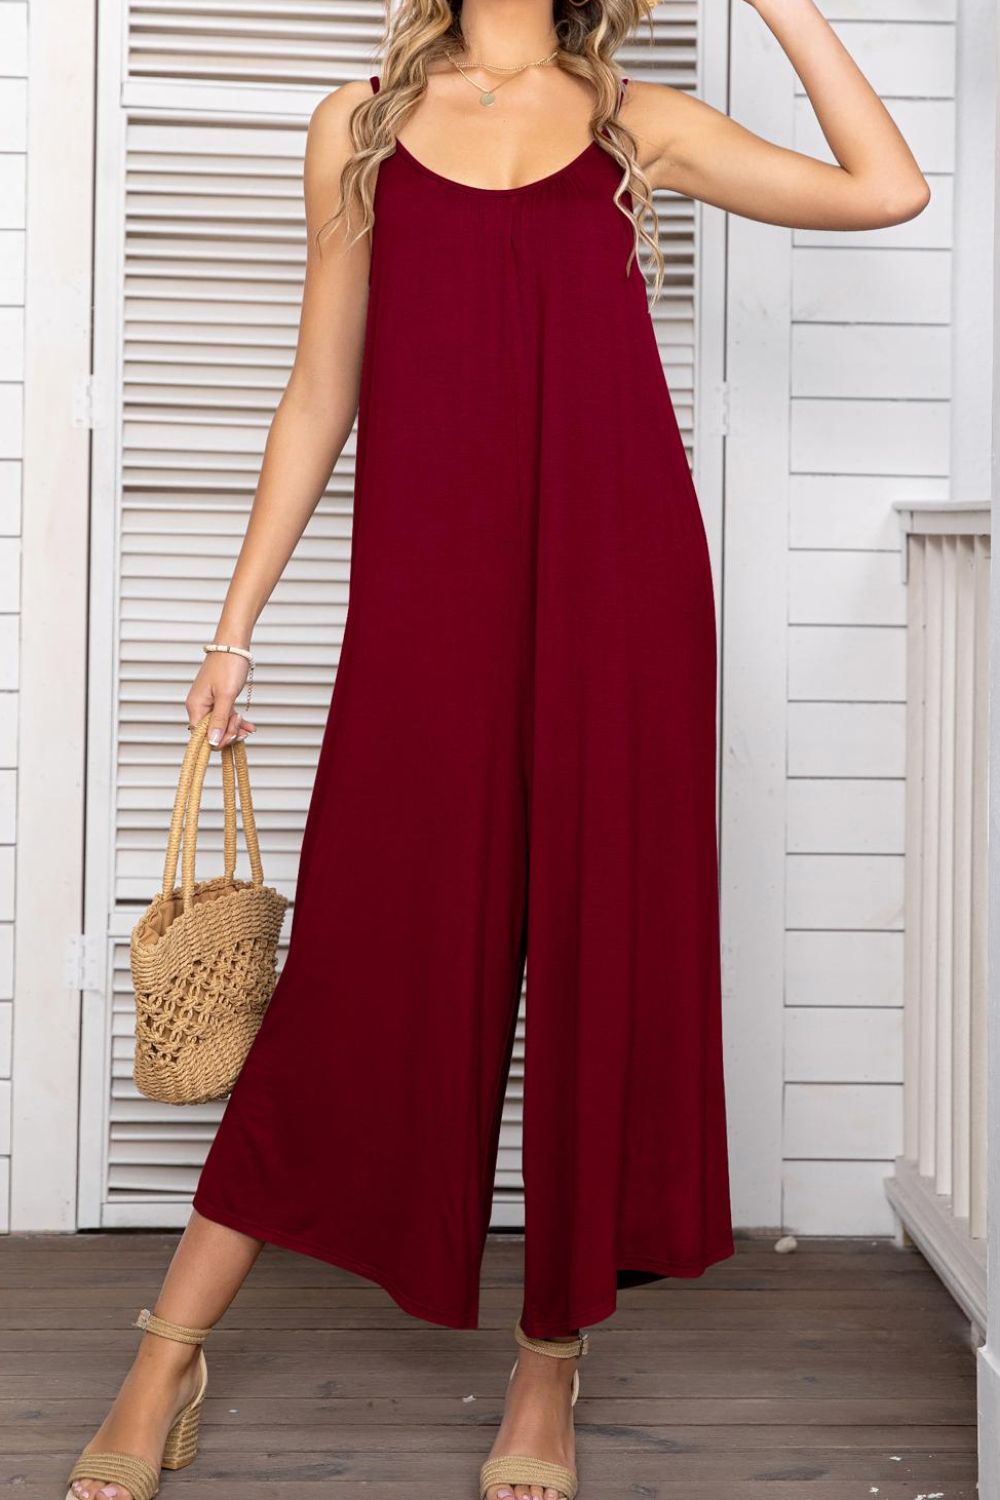 Spaghetti Strap Scoop Neck Jumpsuit - Online Only